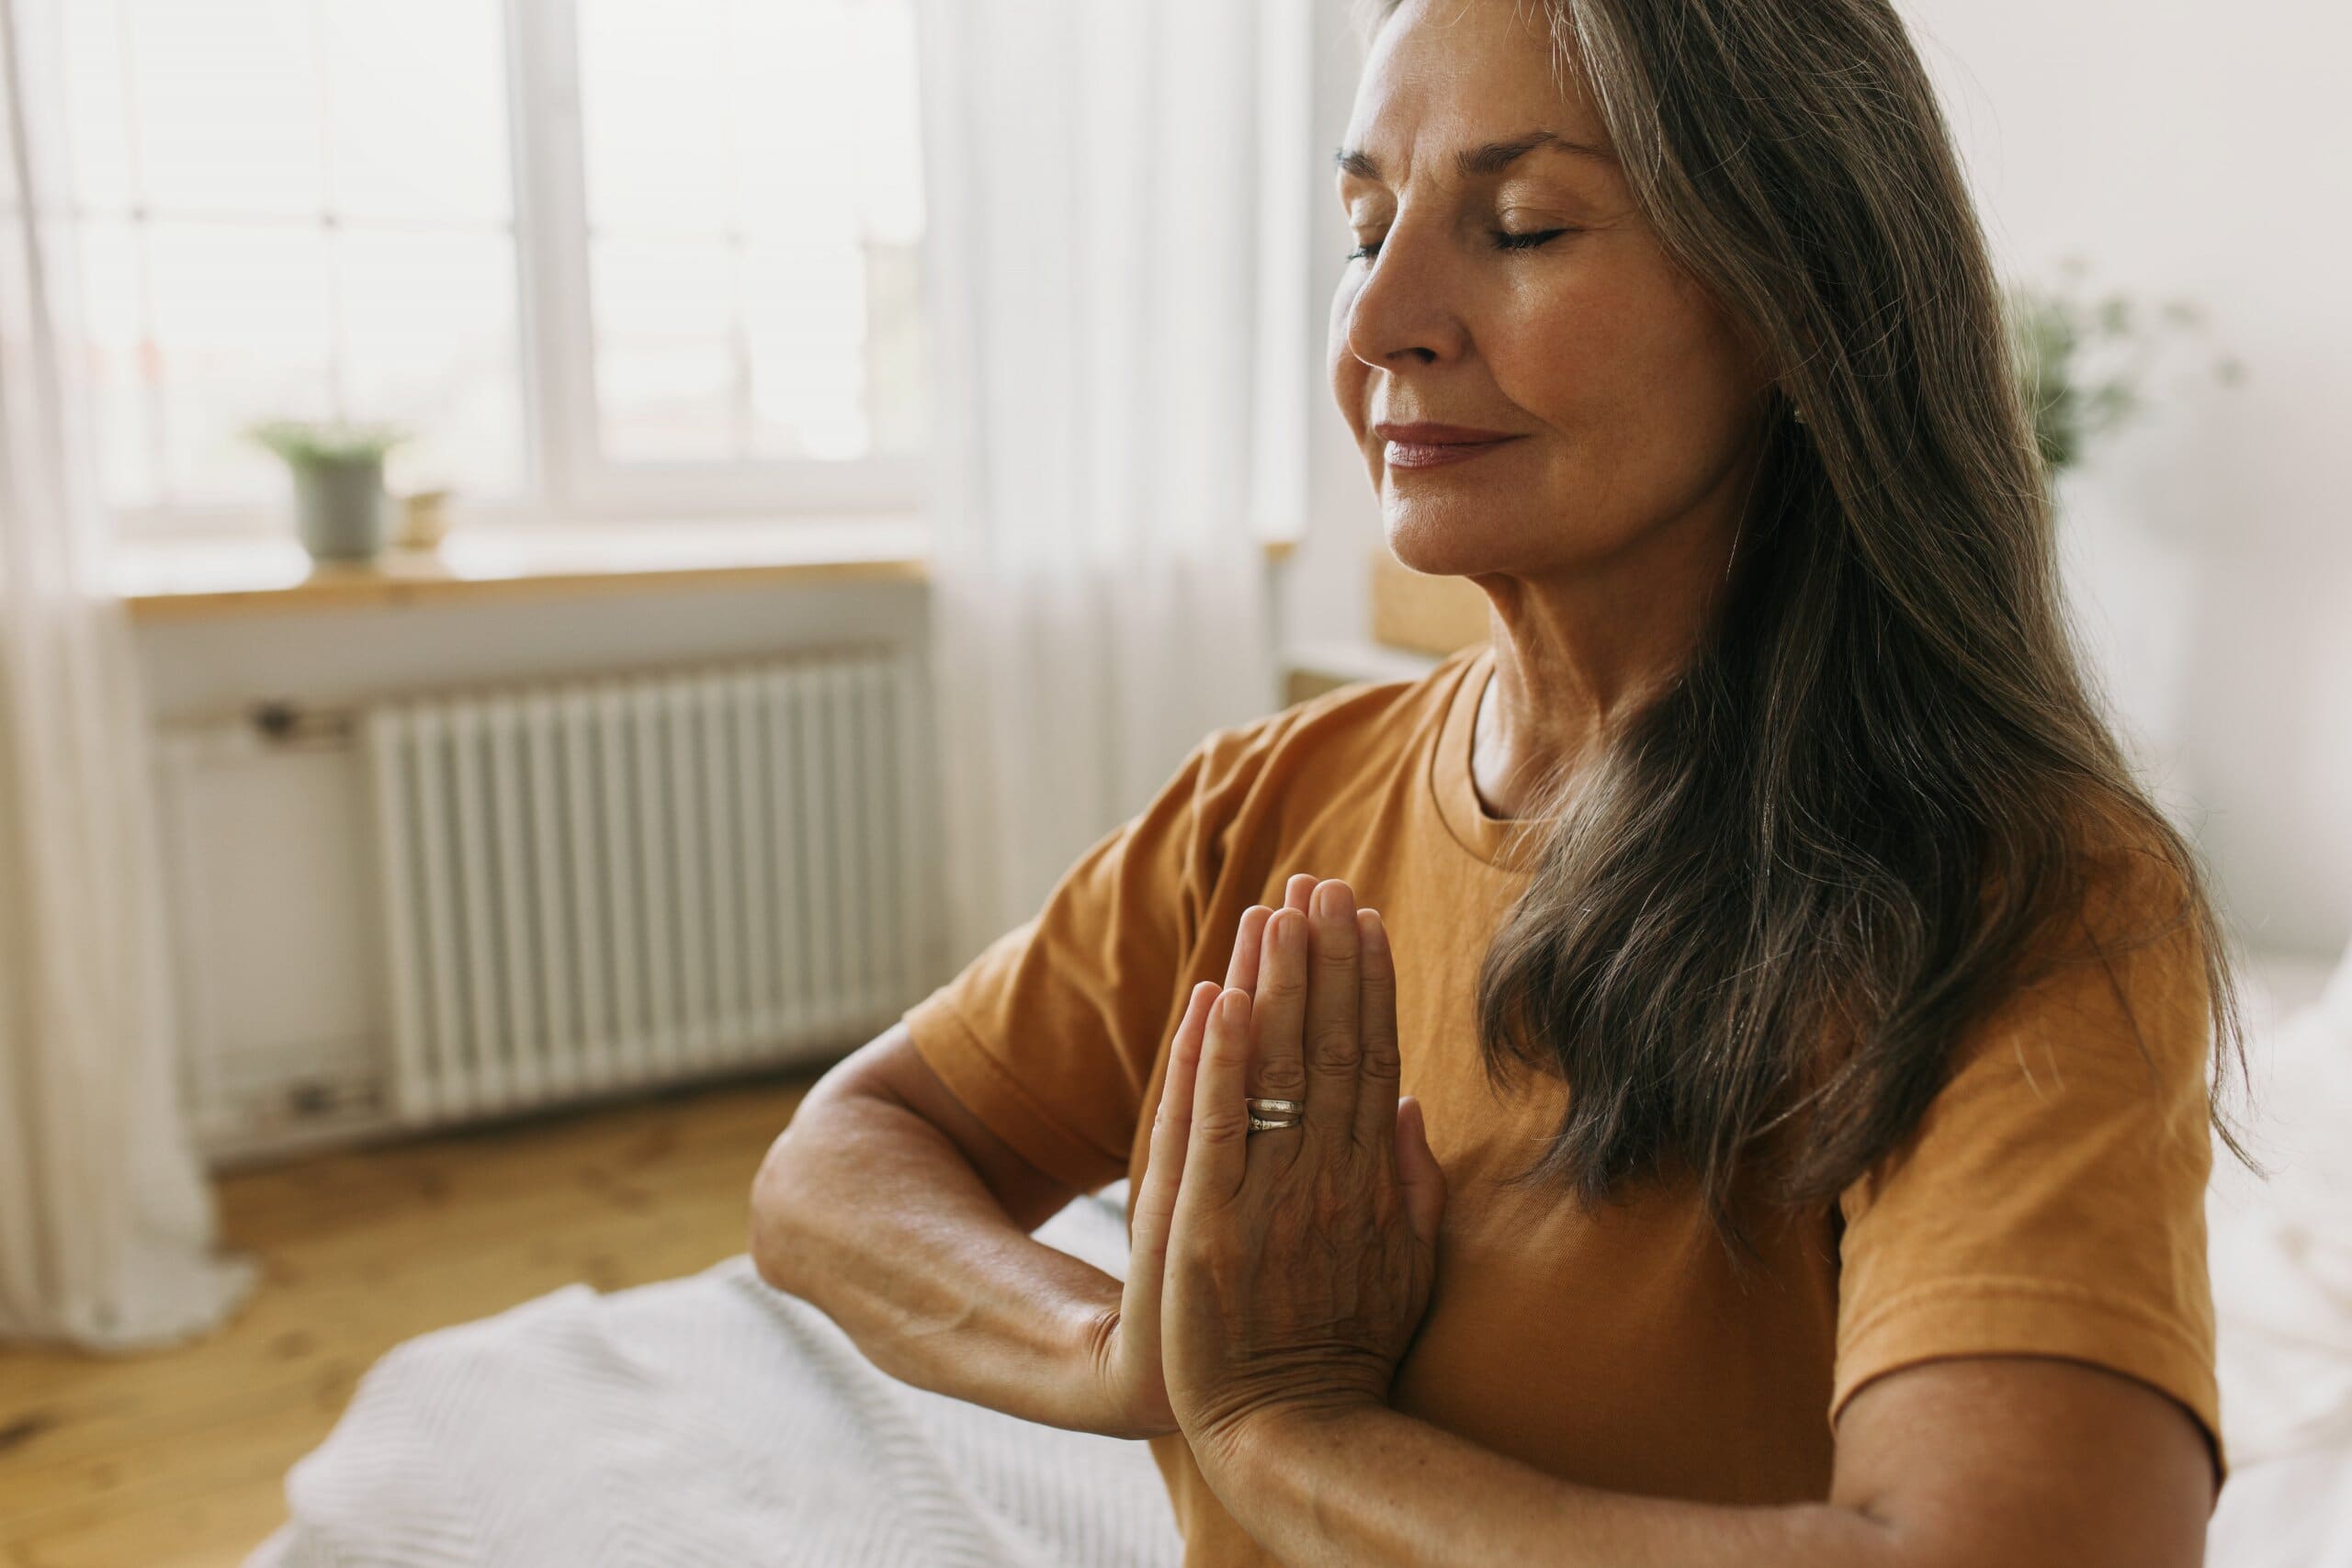 Middle aged lady sat at the end of a bed with her hands in a meditation pose.